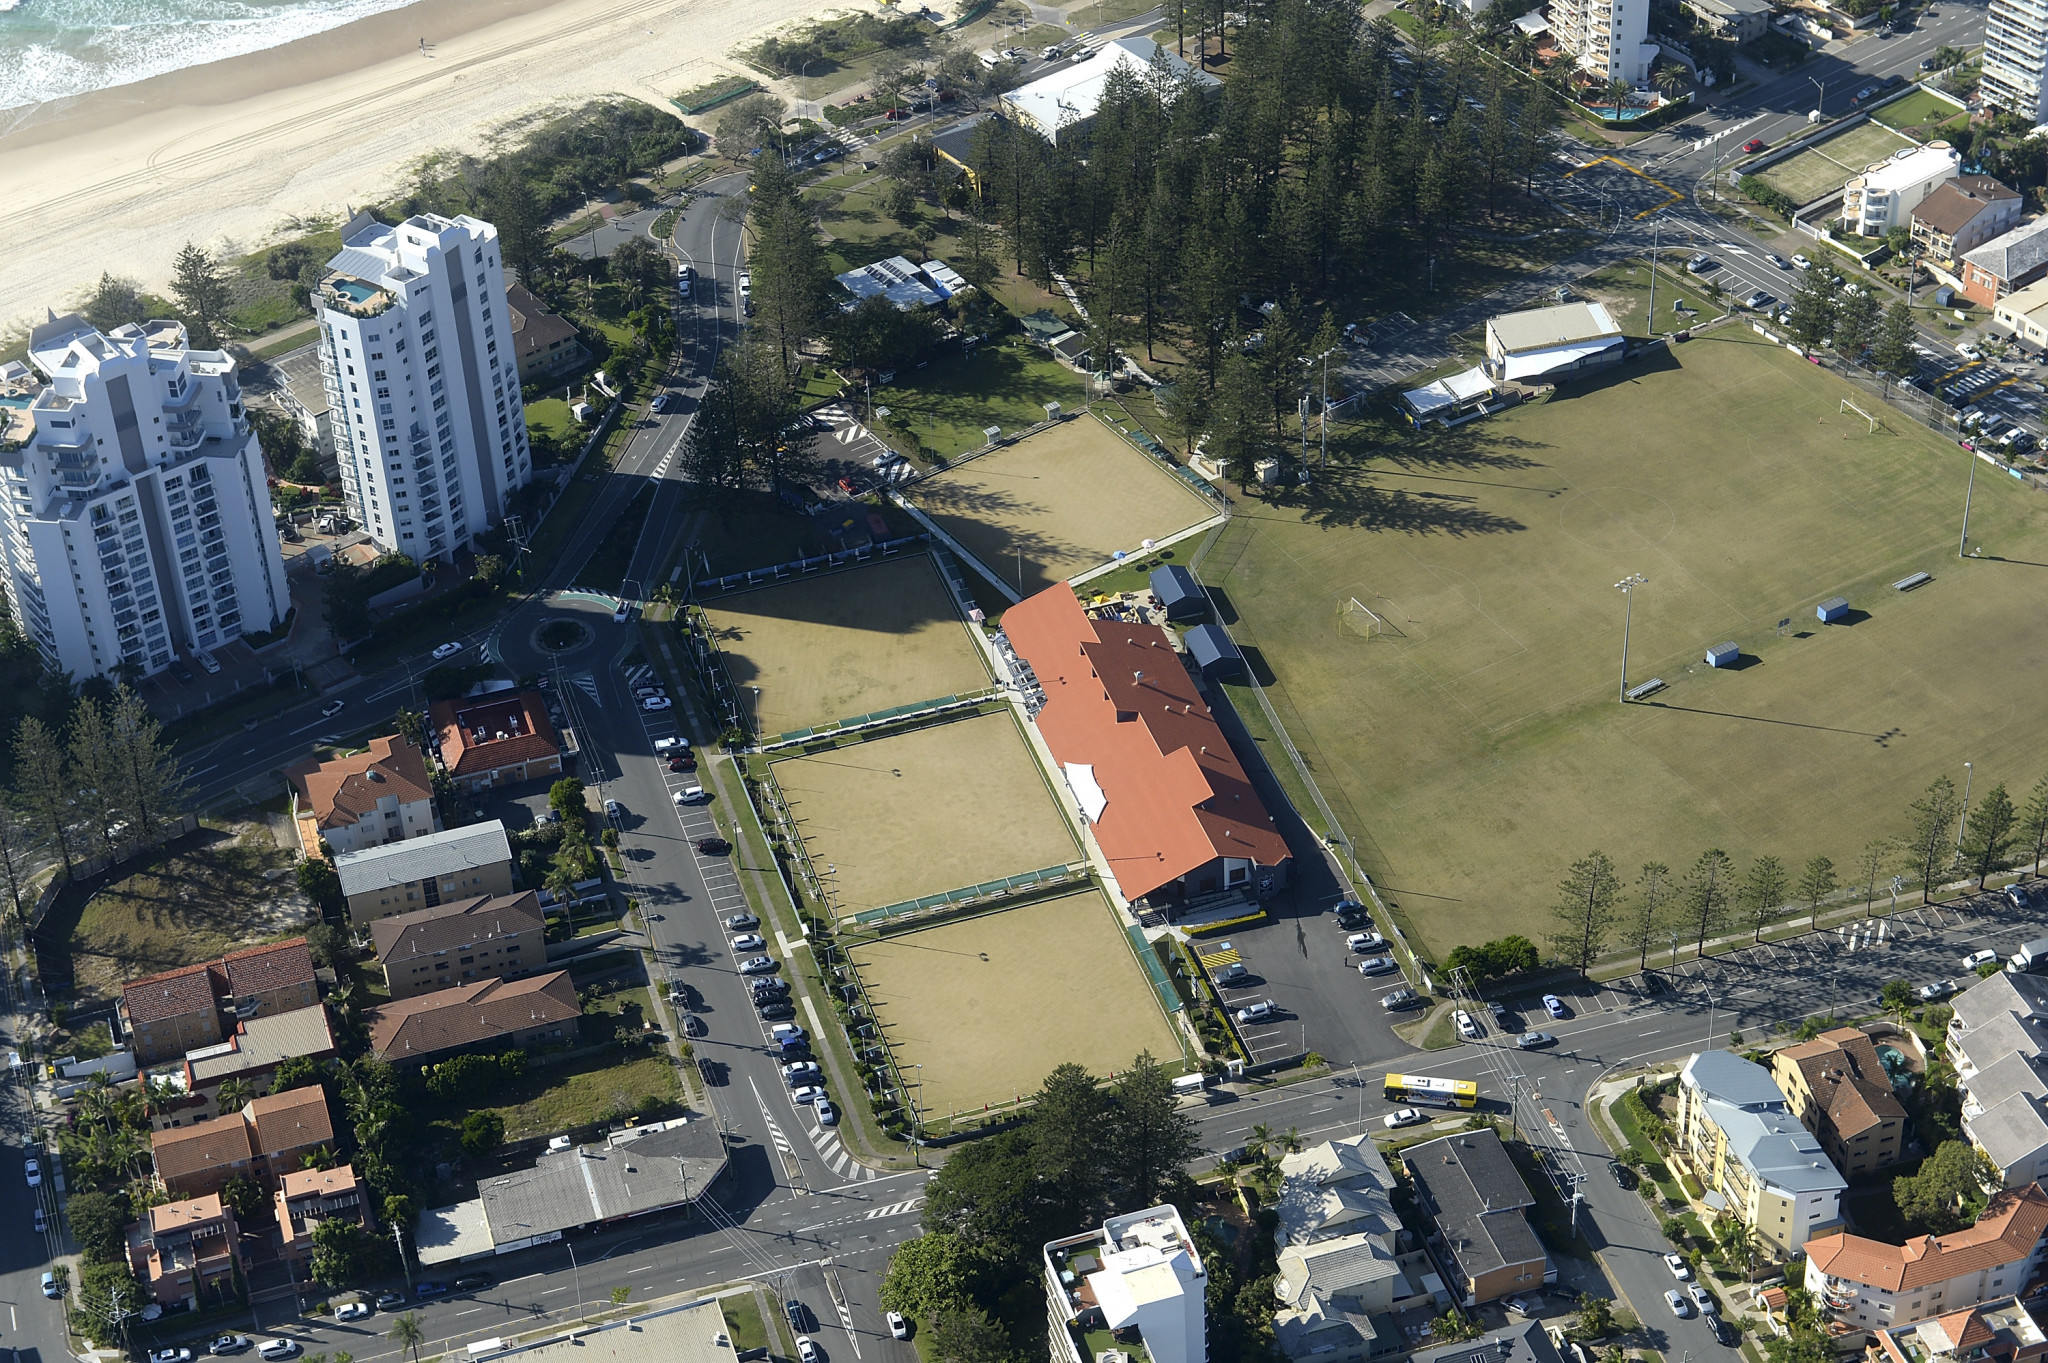 Broadbeach gears up for World Youth Bowls Championships